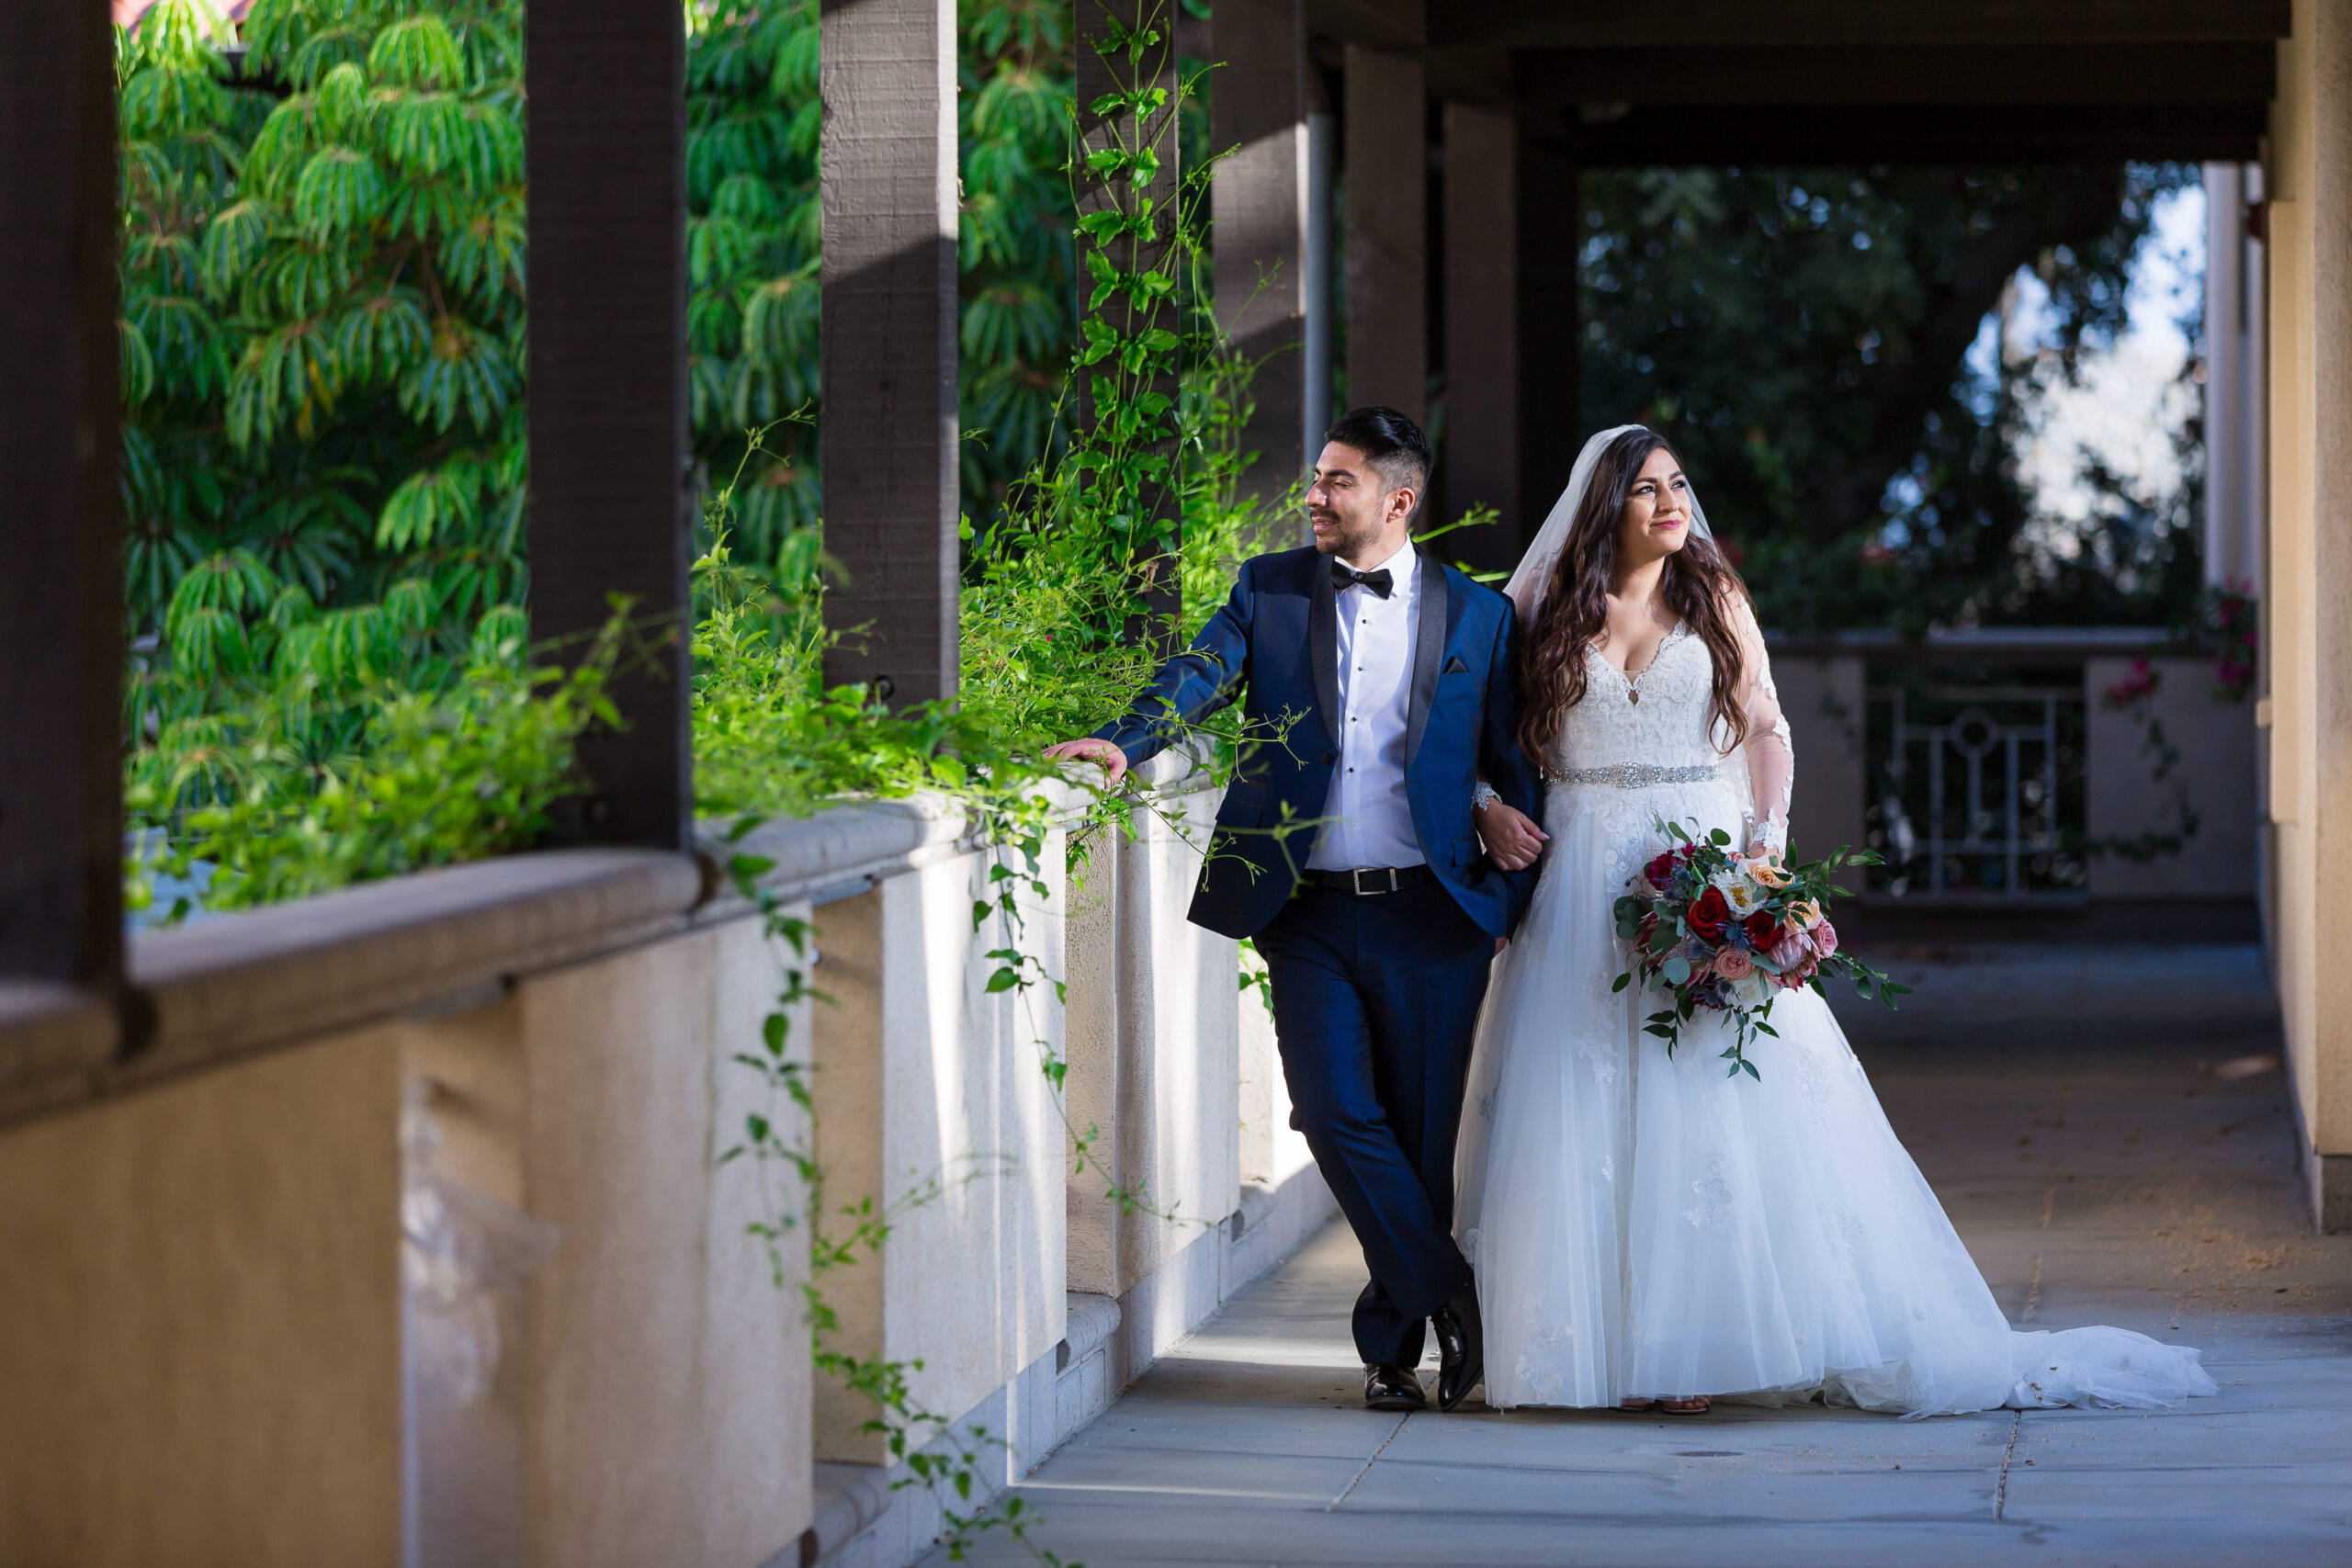 dallas wedding photographers captures bride and groom standing in a corridor together with green vines creeping in from the garden for their dallas wedding photography